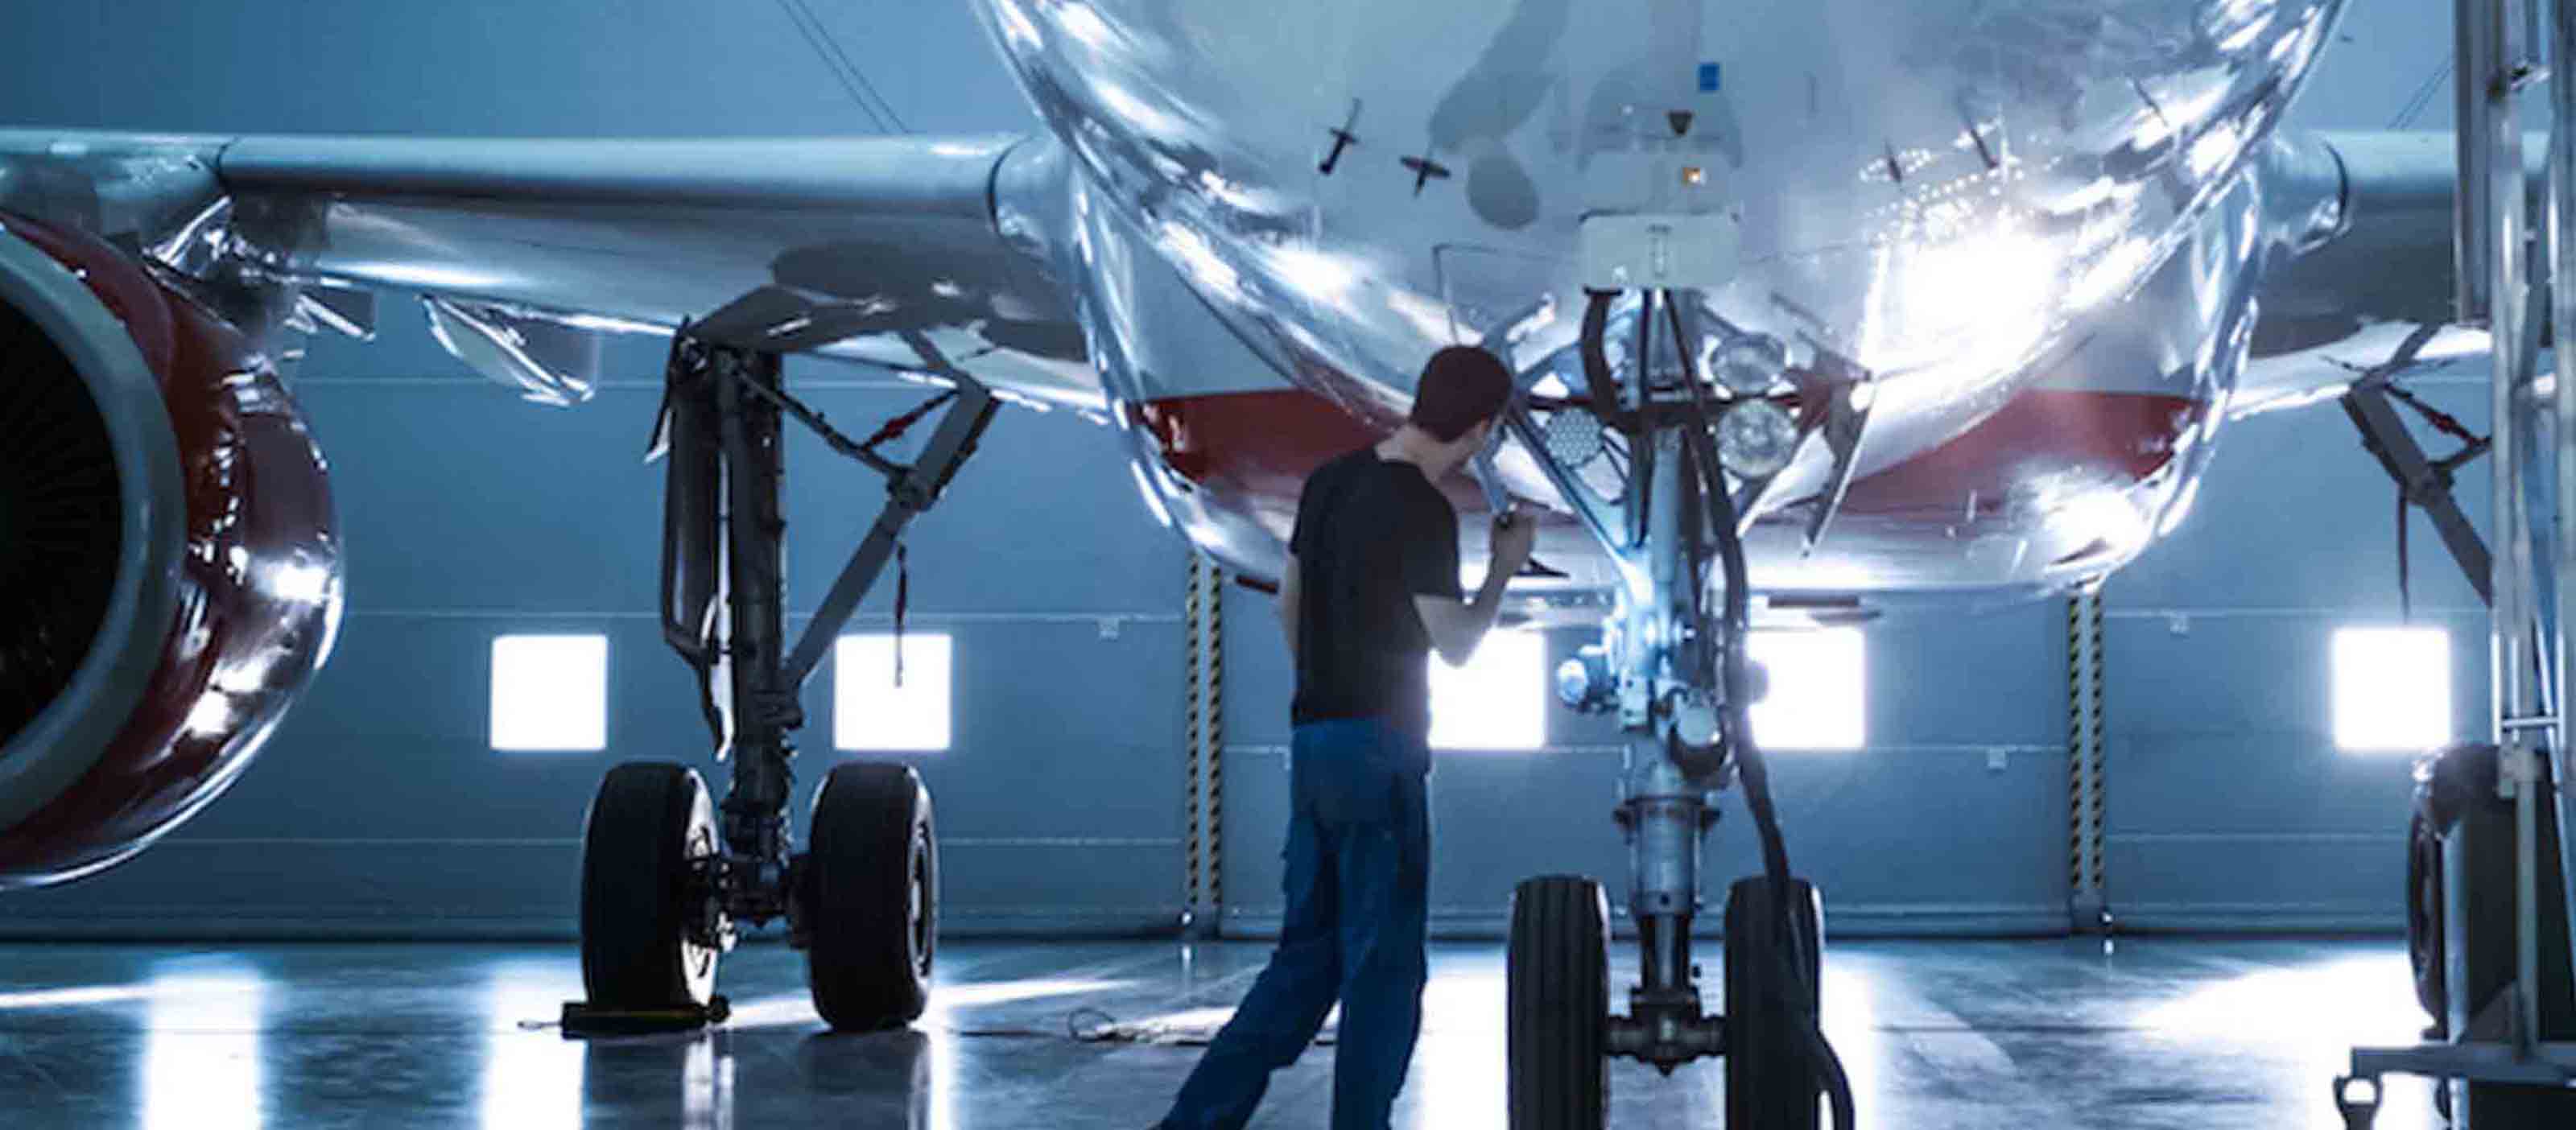 Aviation maintenance aided by GE Digital software